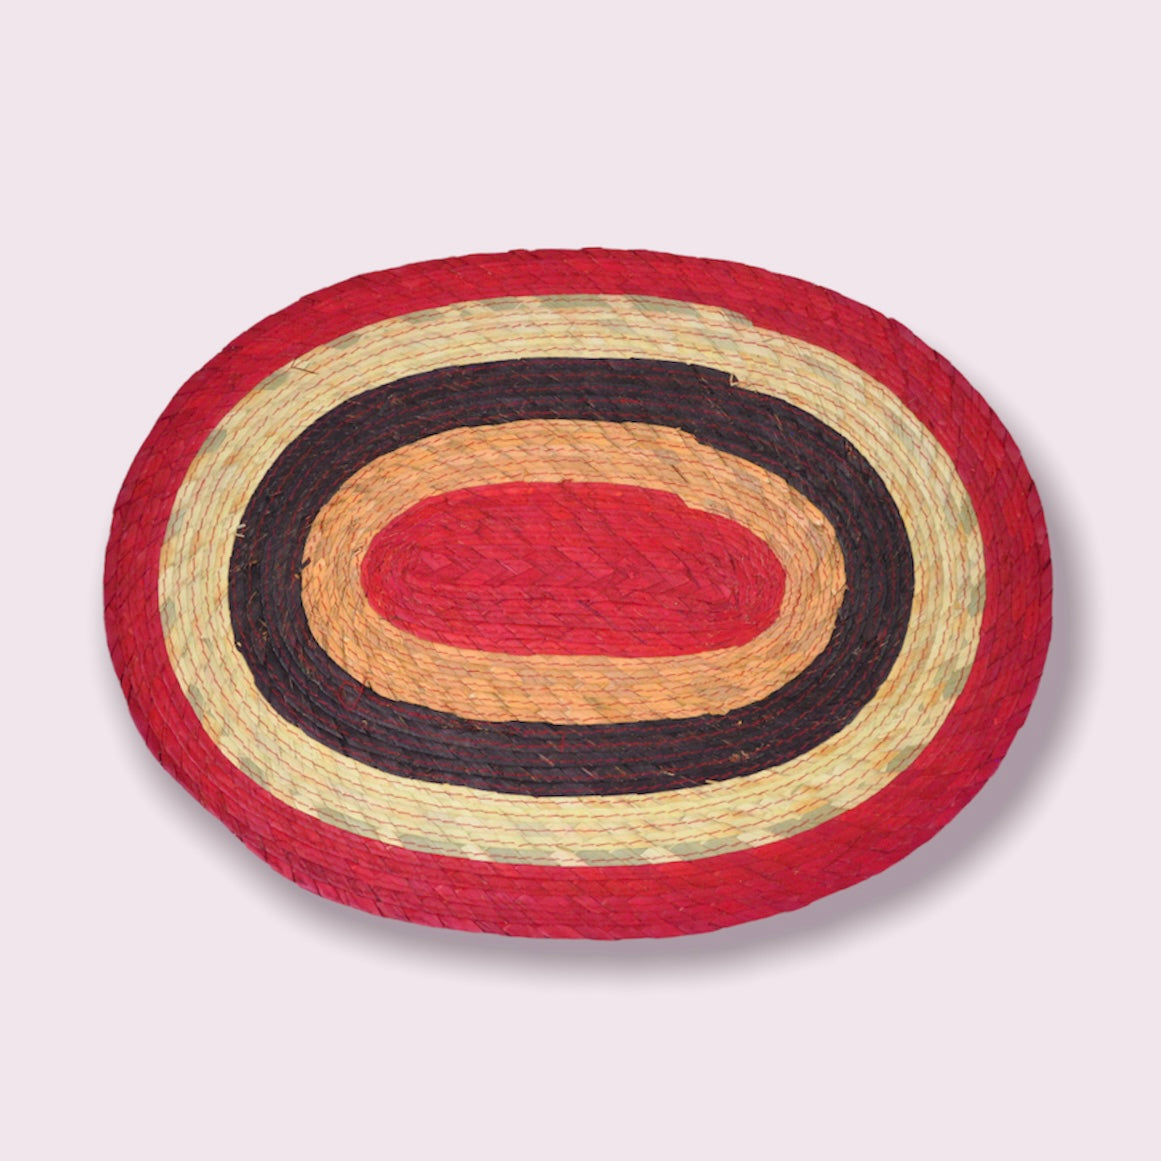 Carnival Oval Placemats Red & Brown